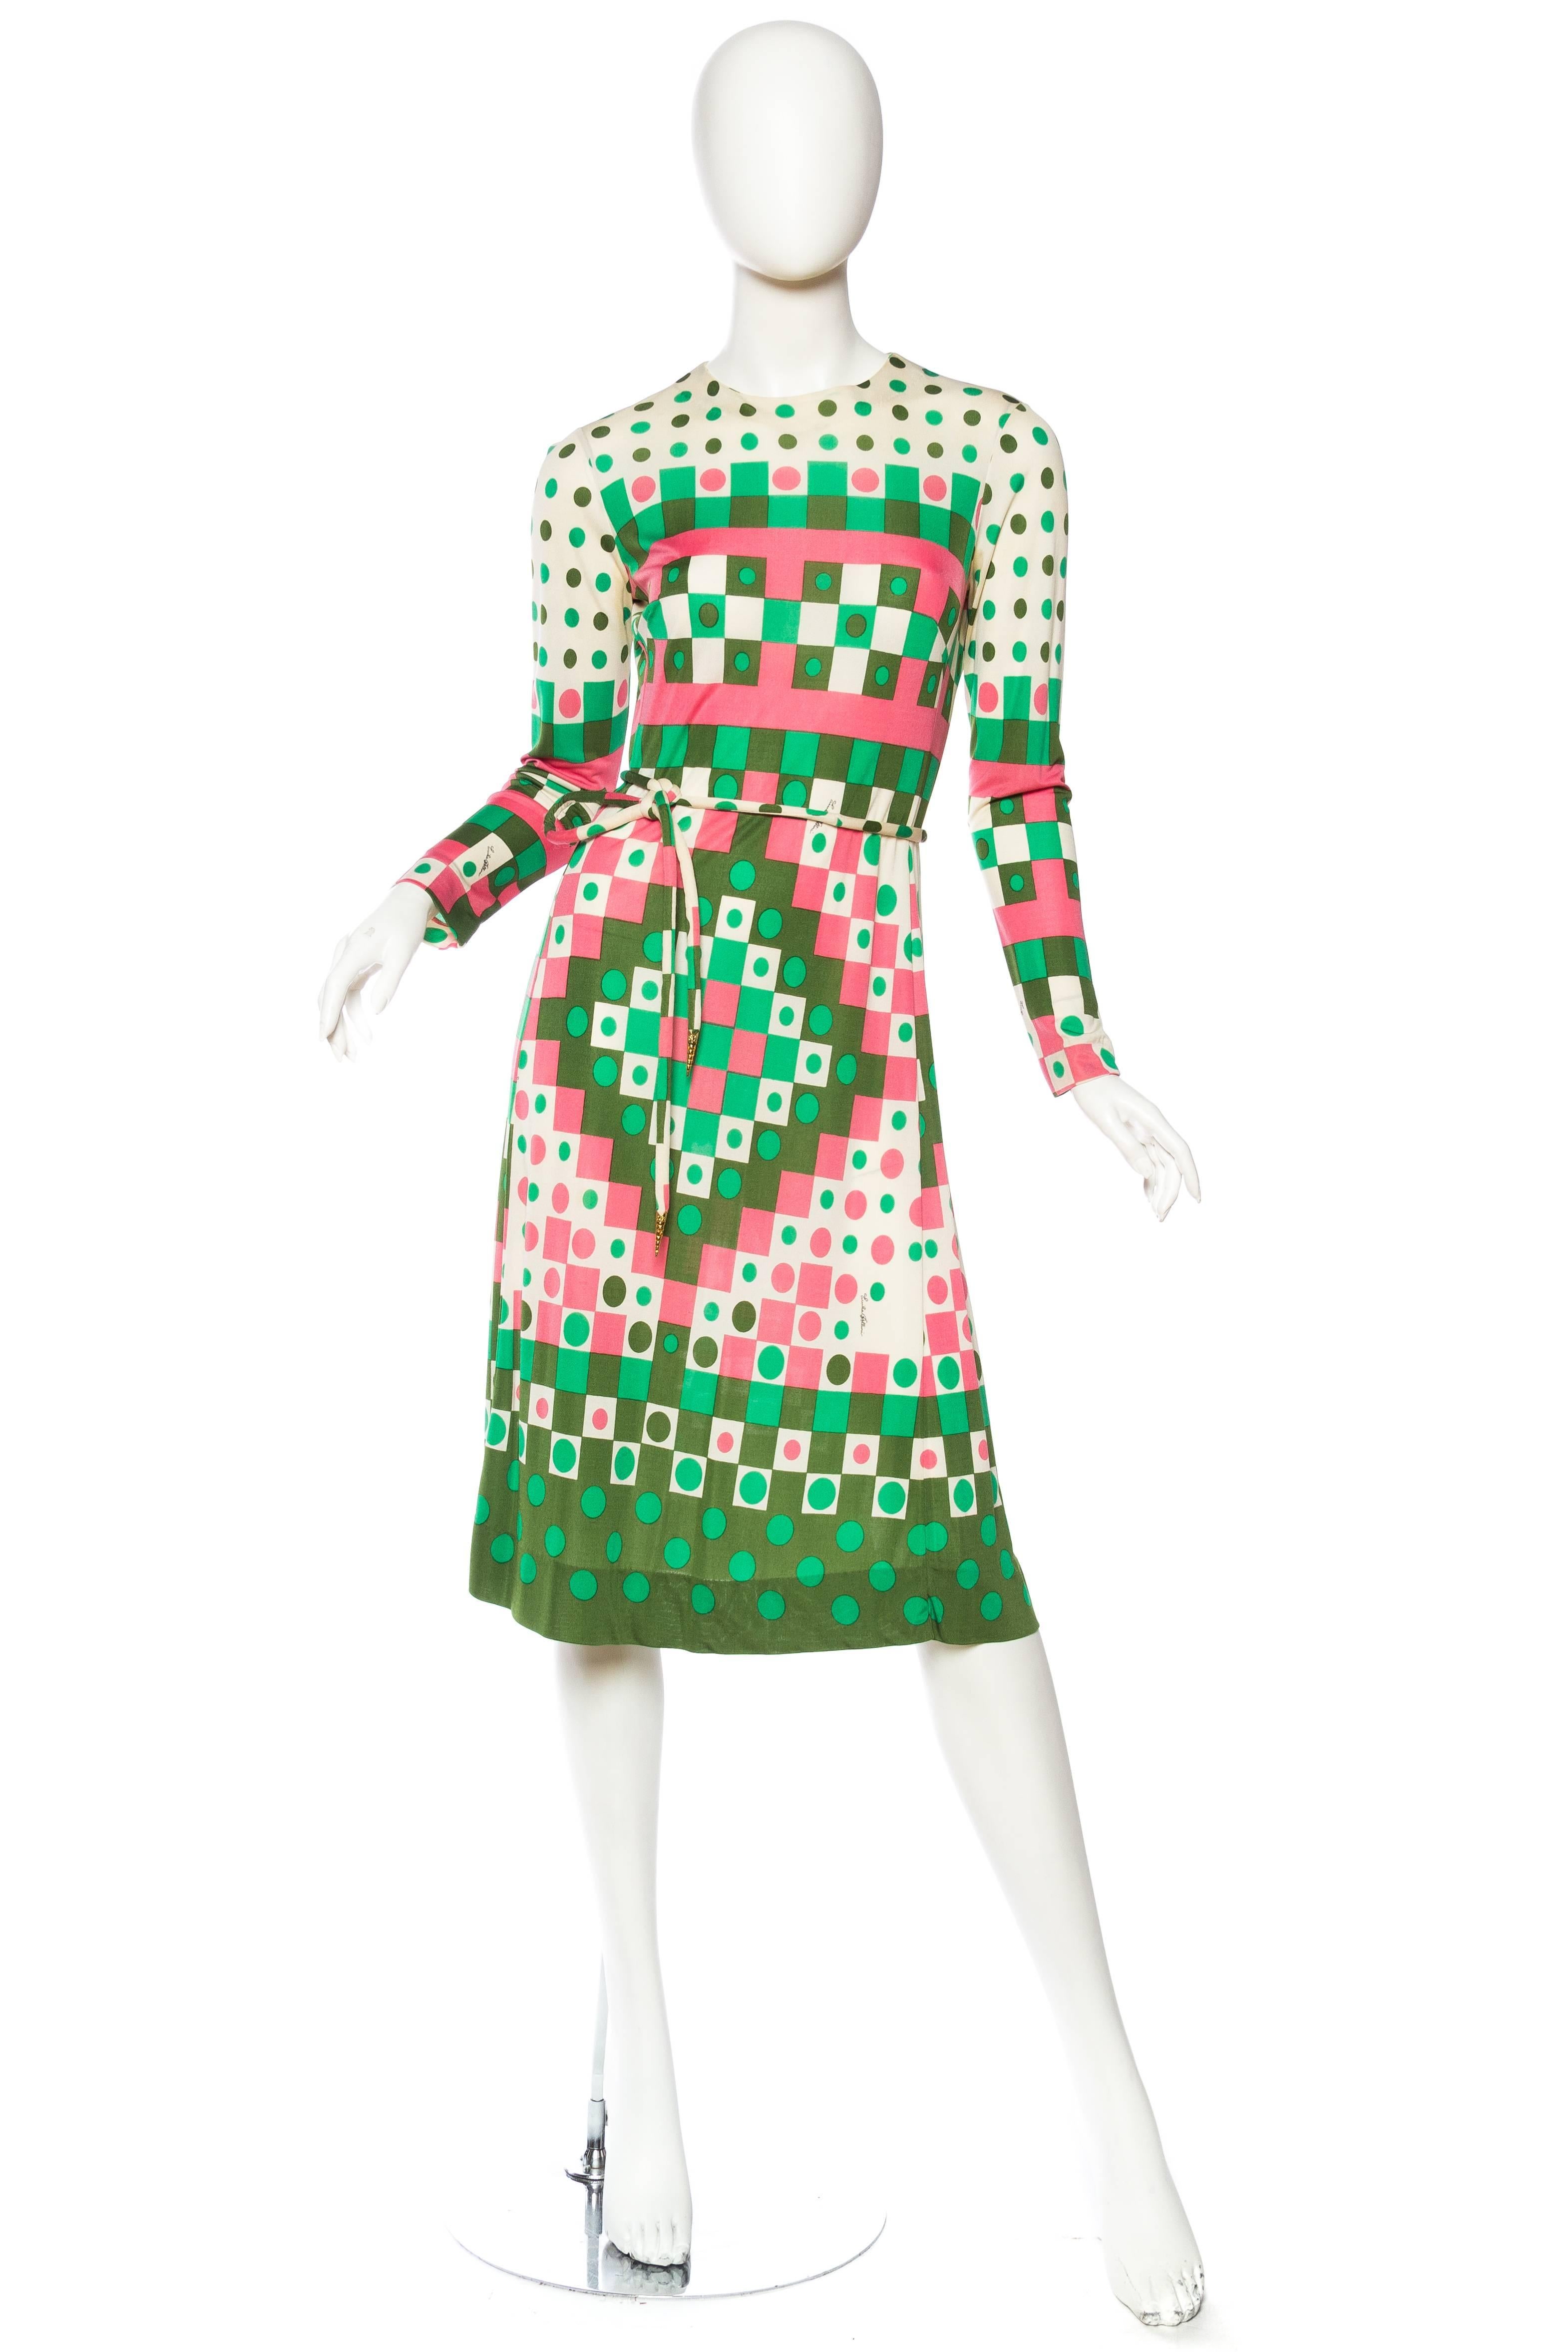 We are just loving the Italian style of Gucci these days and with any knowledge of Italian fashion's past one can see easily where they are taking their inspiration. This wonderfully soft Emilia Bellini dress dates to over 50 years ago yet with